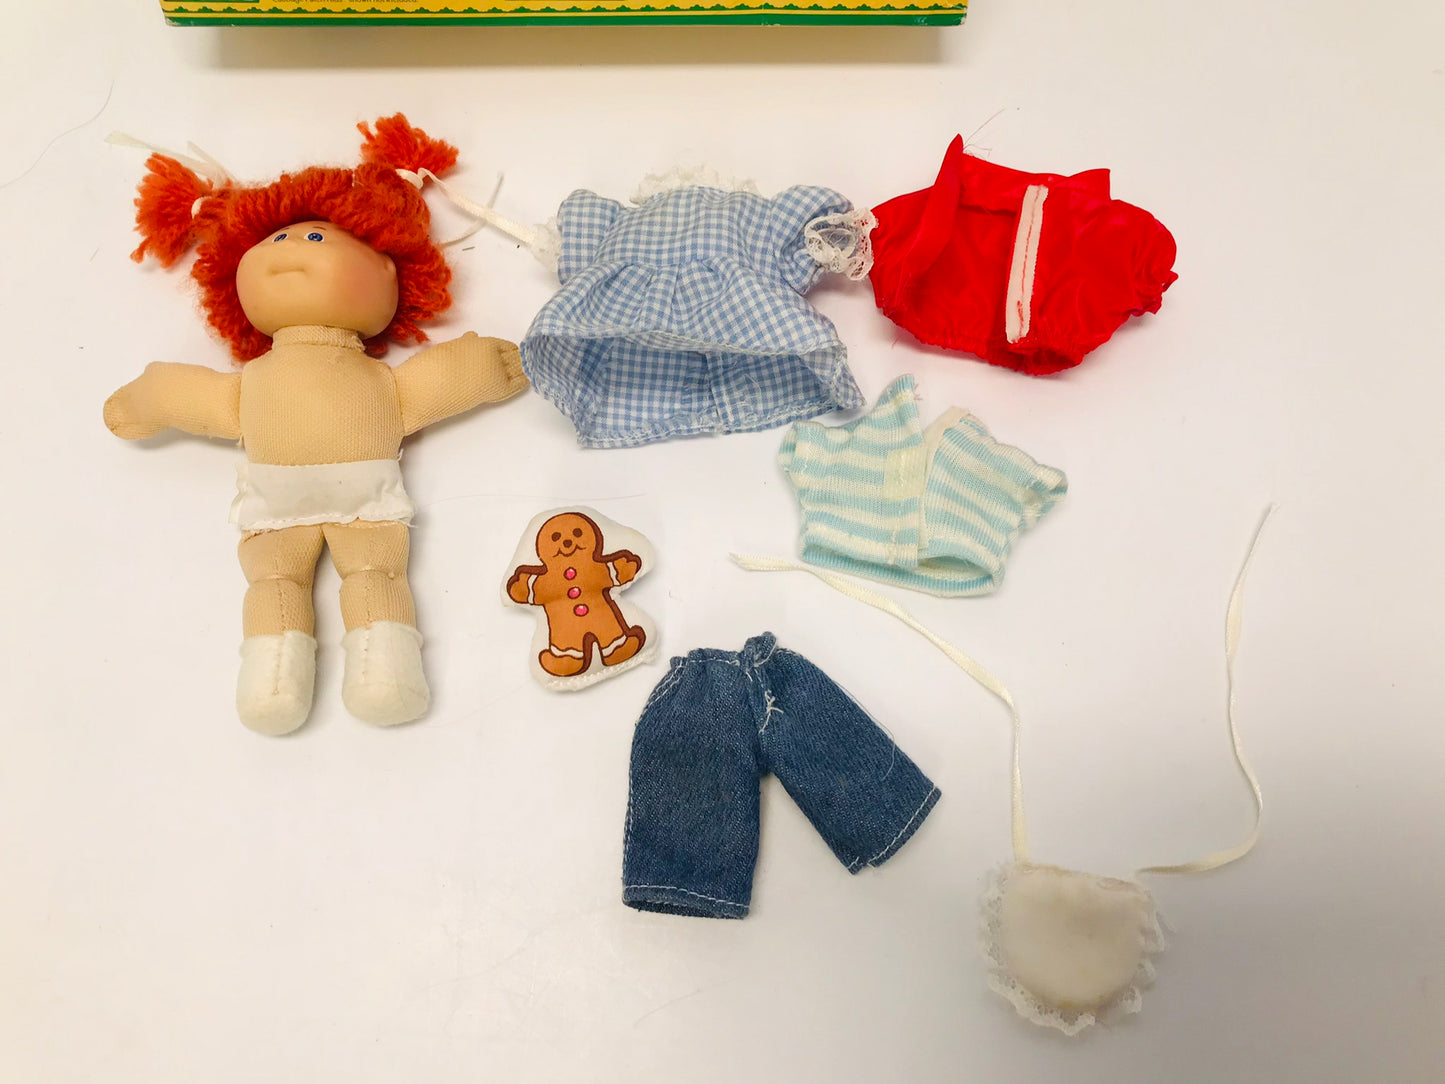 Vintage Toys 1984 Cabbage Patch Playmate Mini Soft Doll and Accessories